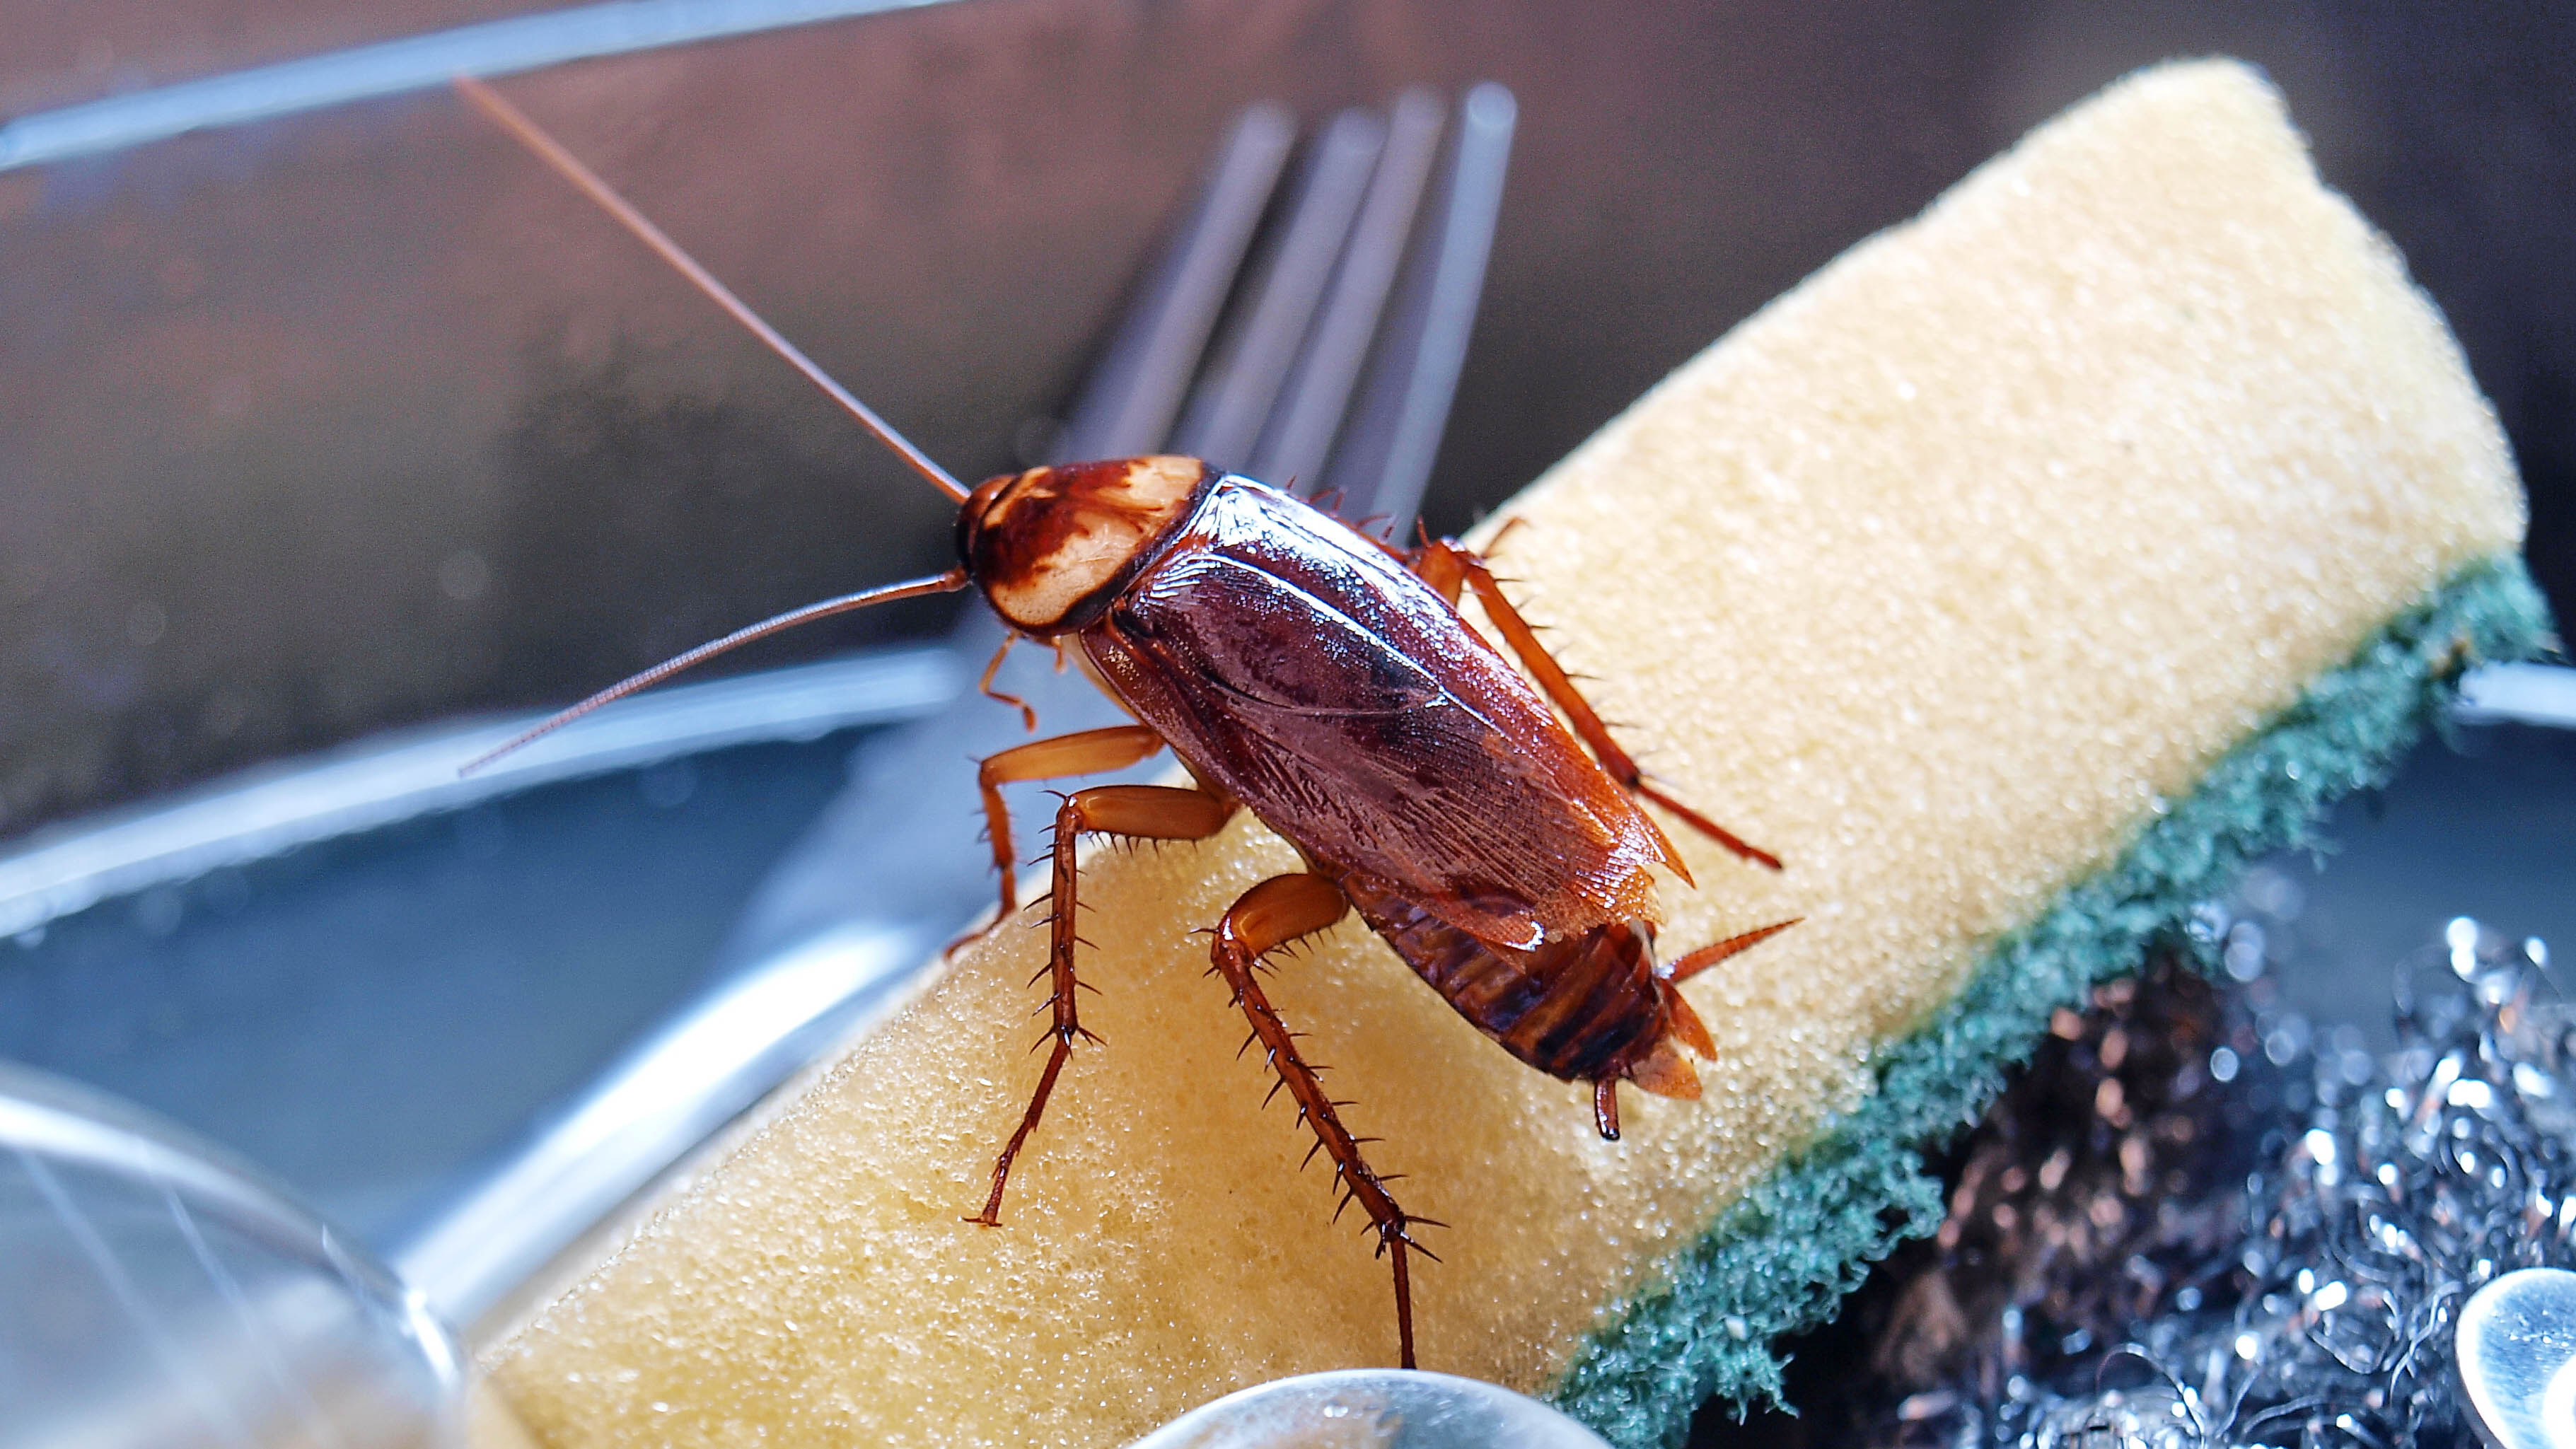 How To Get Rid Of Roaches Quickly And Safely Toms Guide